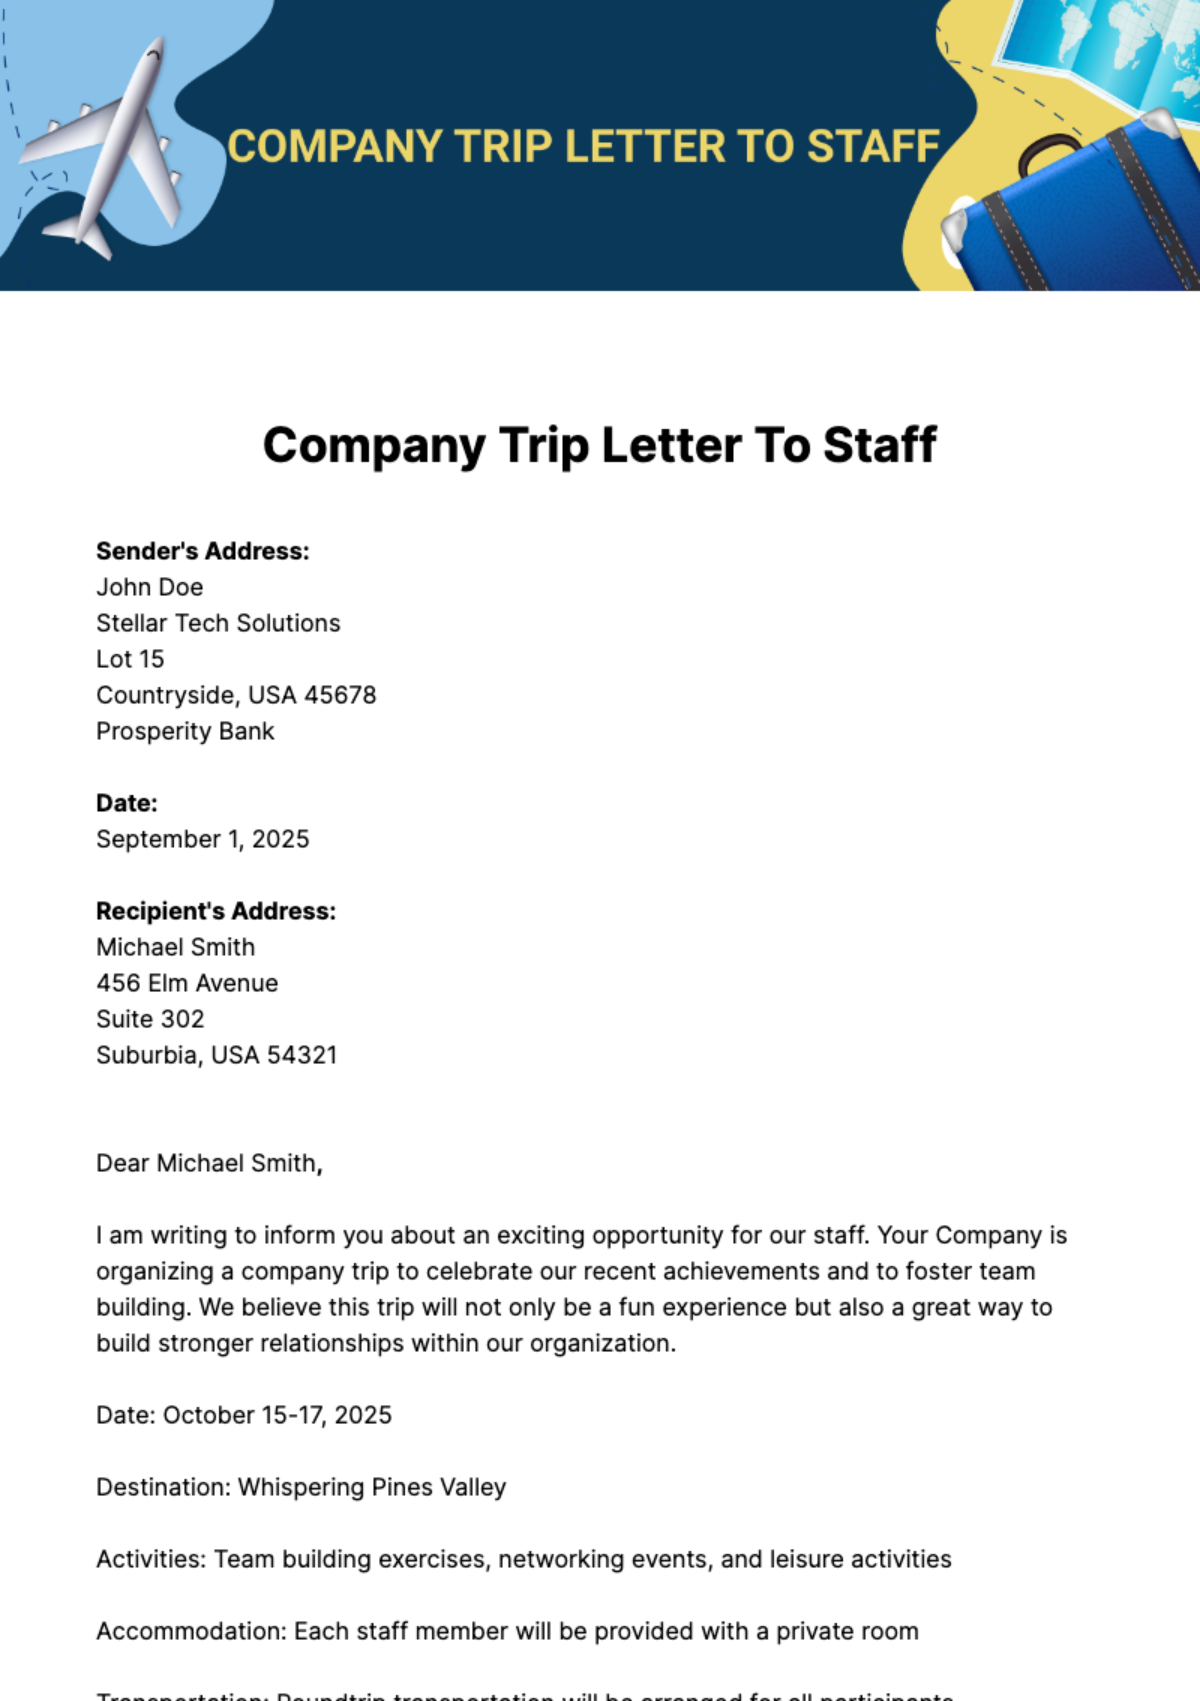 Free Company Trip Letter To Staff Template